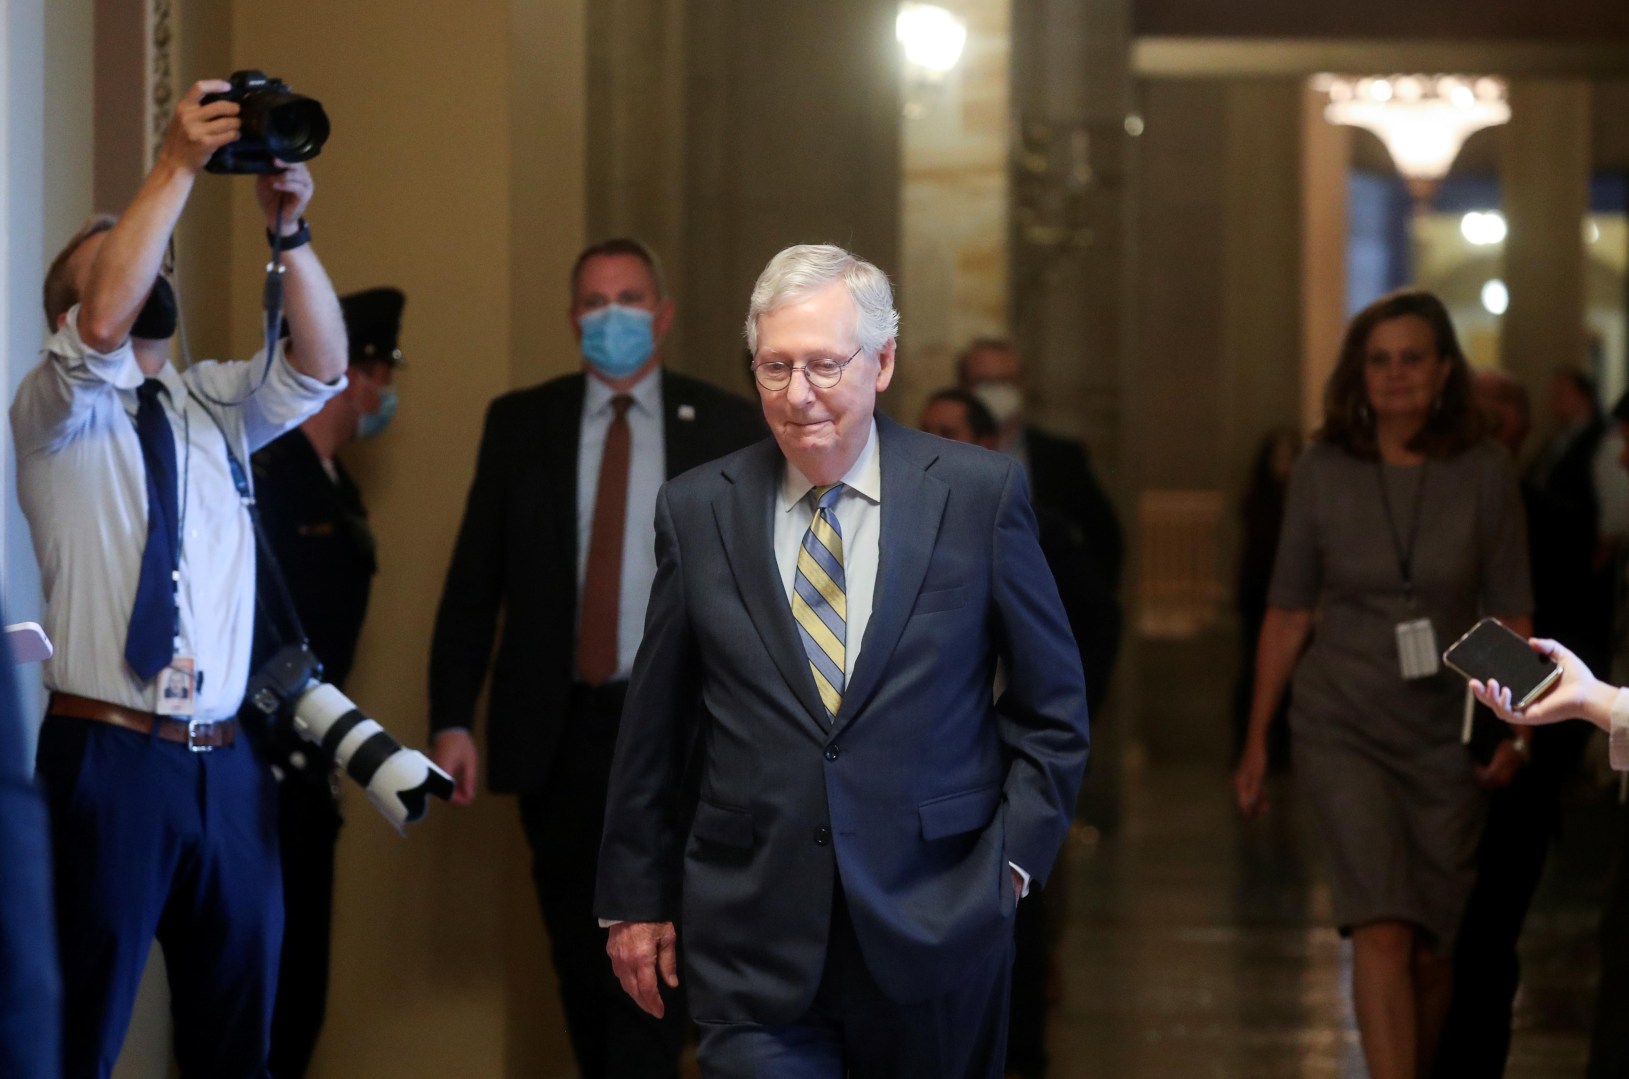 Mitch McConnell offered a deal to Democrats regarding the debt ceiling.